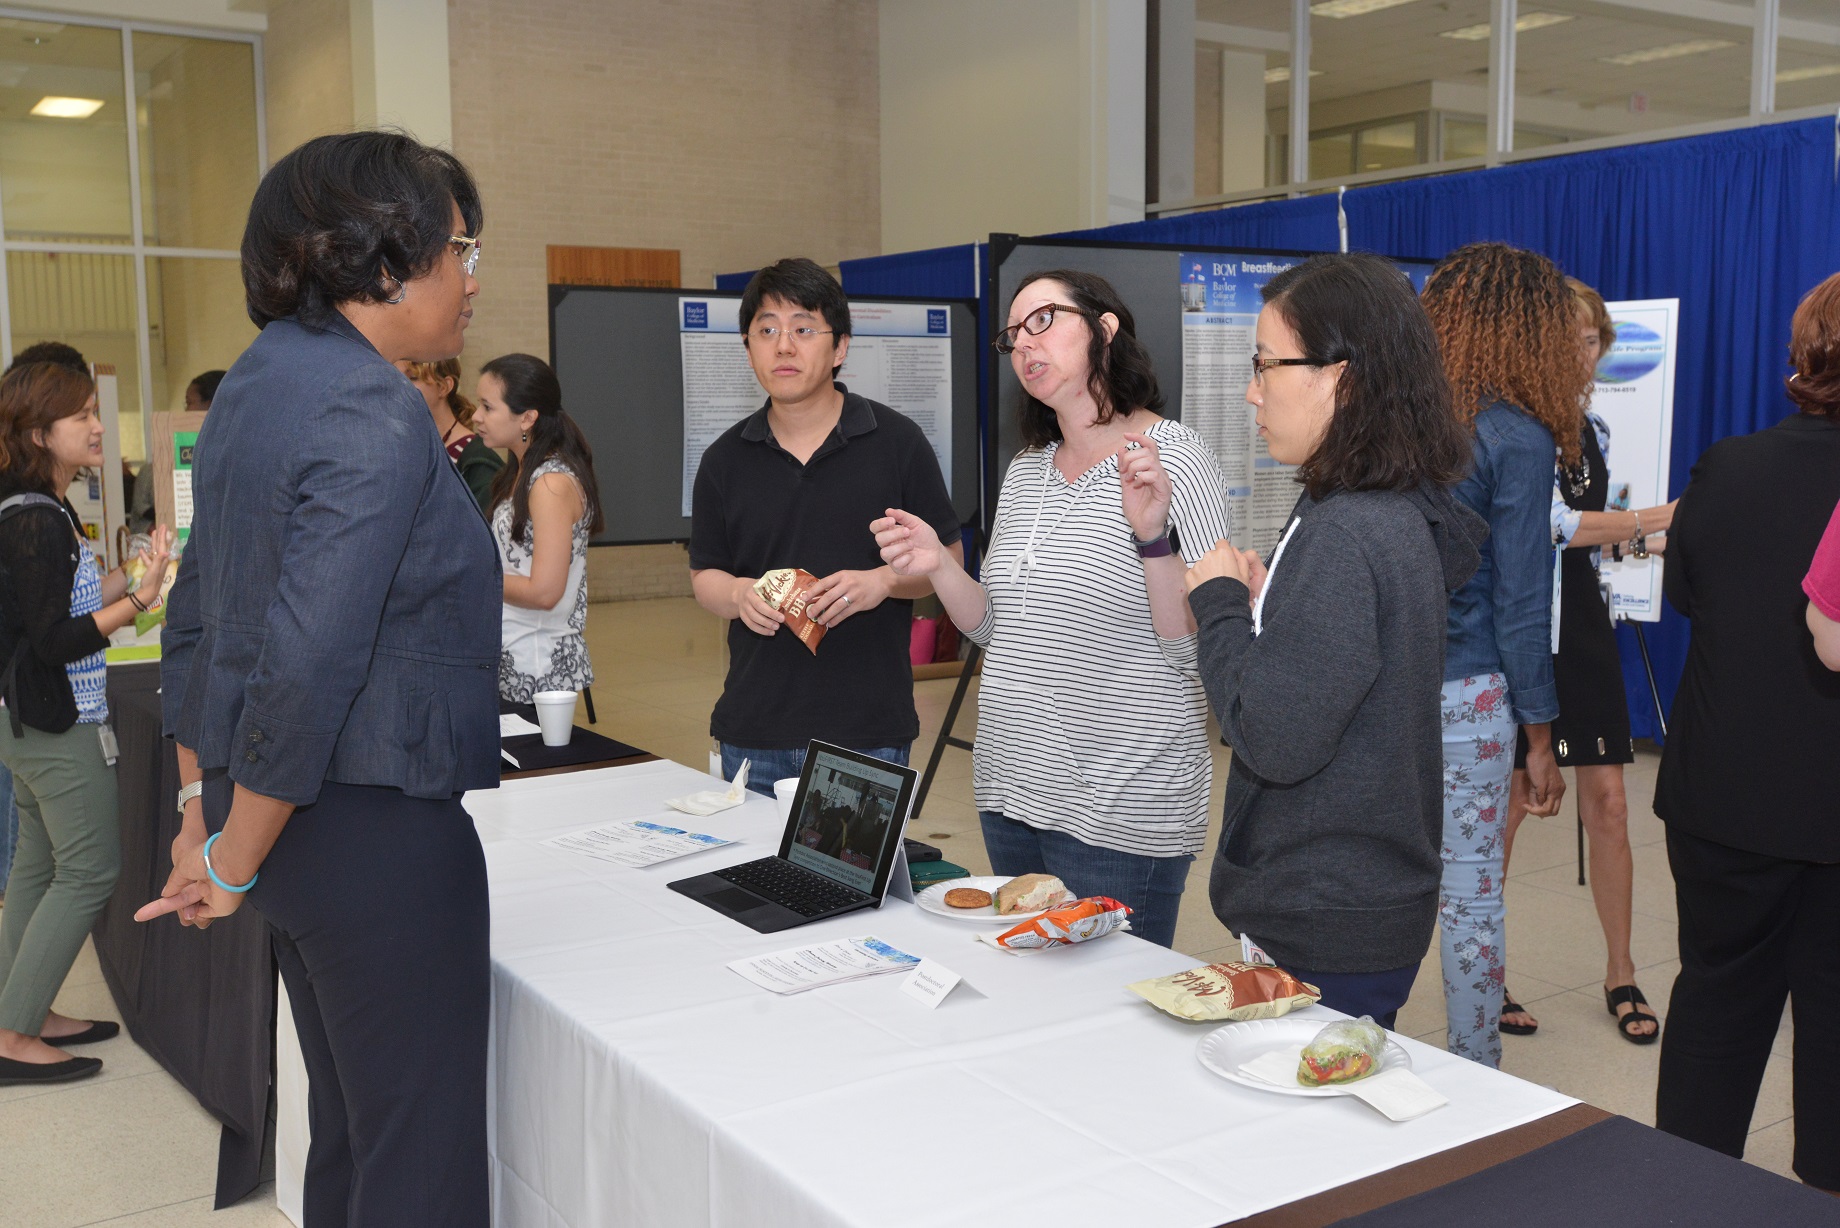 Several attendees, including faculty, students and trainees, presenting at BCM's annual National Diversity and Inclusion closing Showcase event.